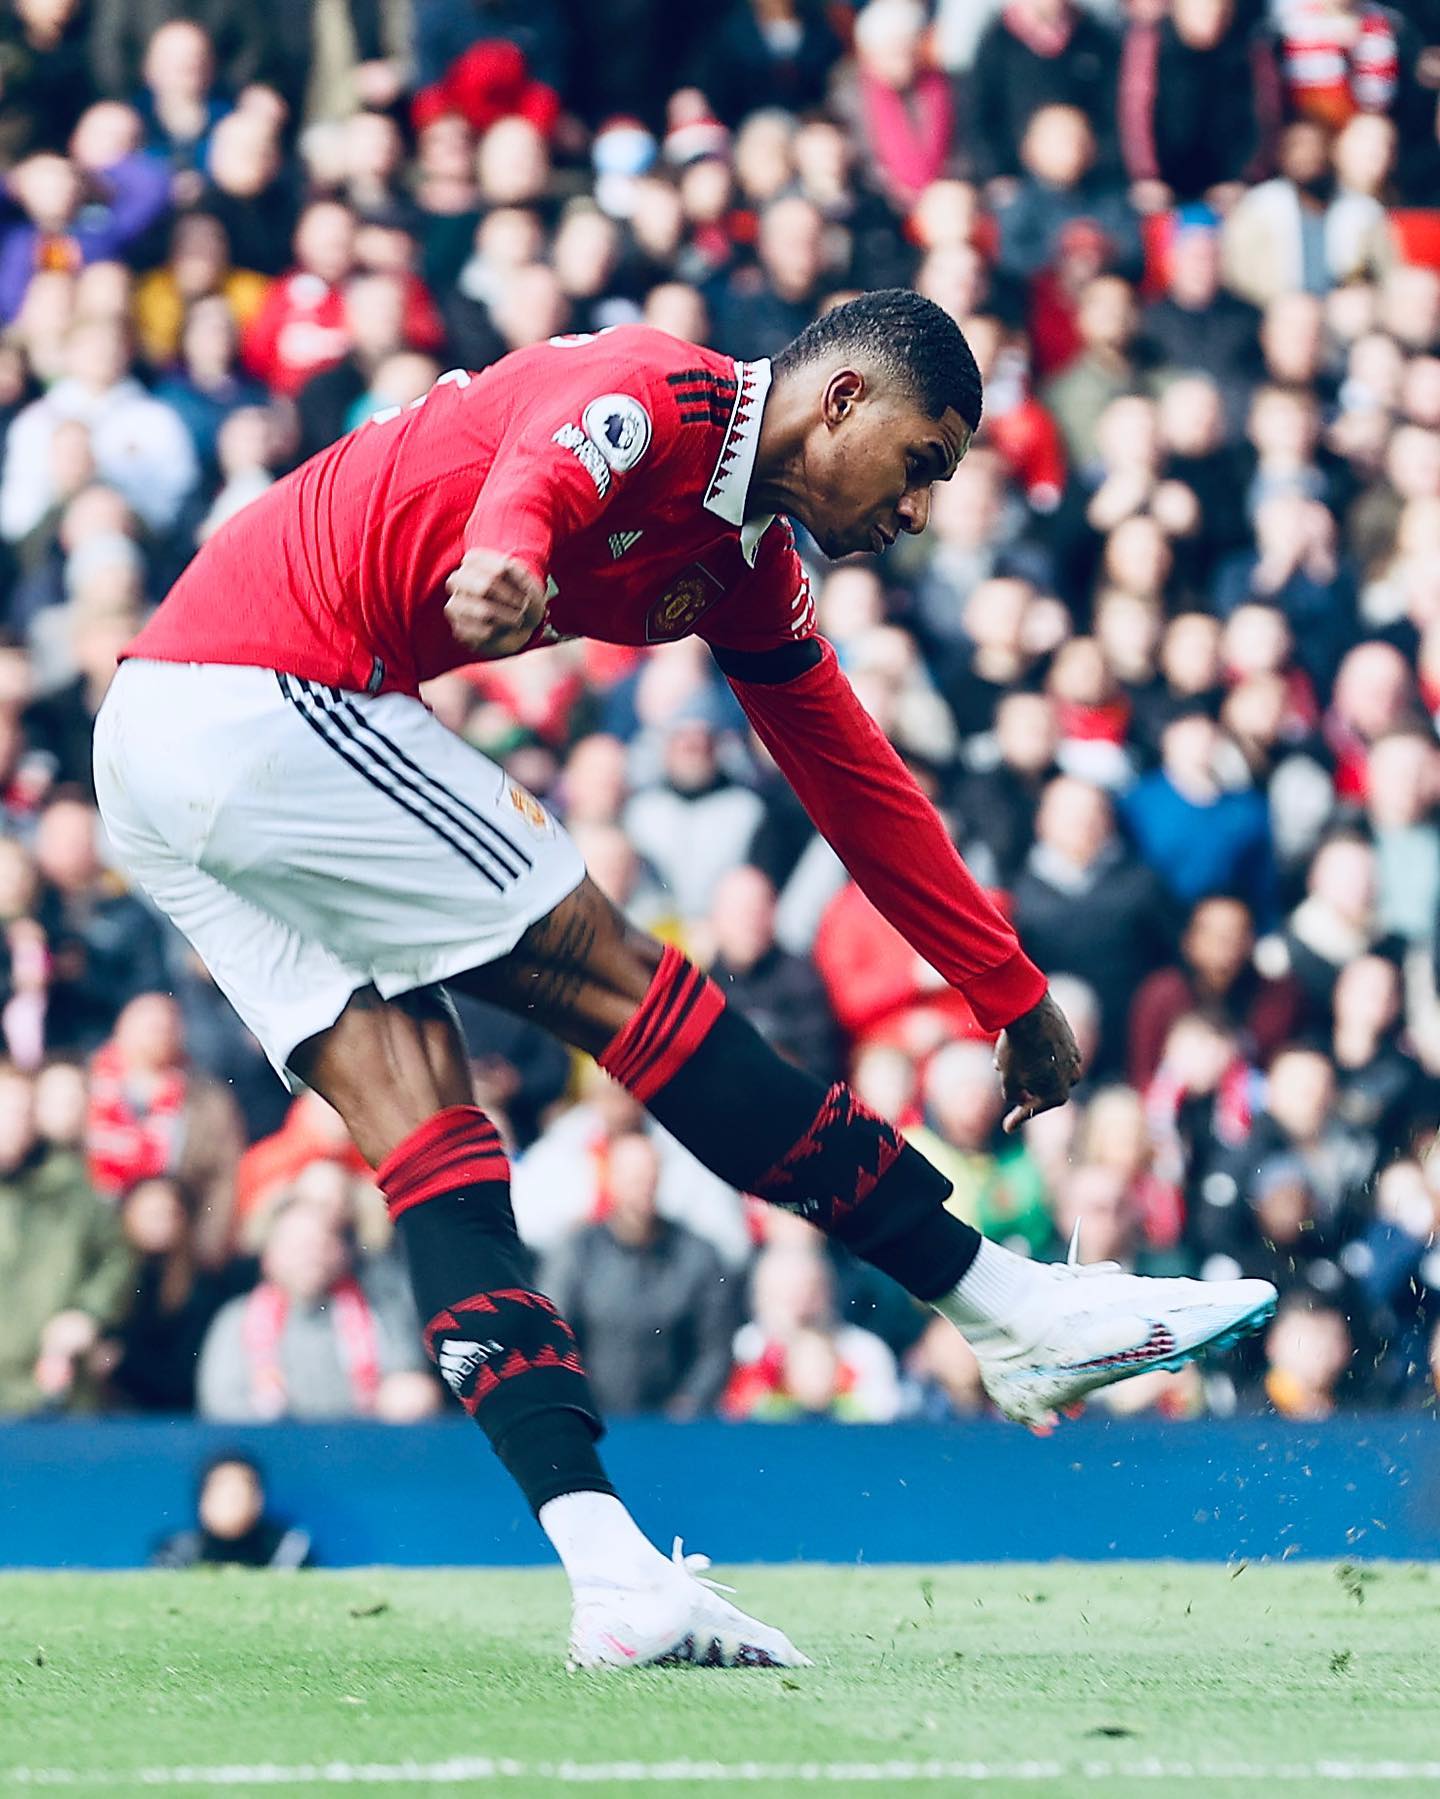 Marcus Rashford has reached the age of removing the goals set by the most important players at Manchester United